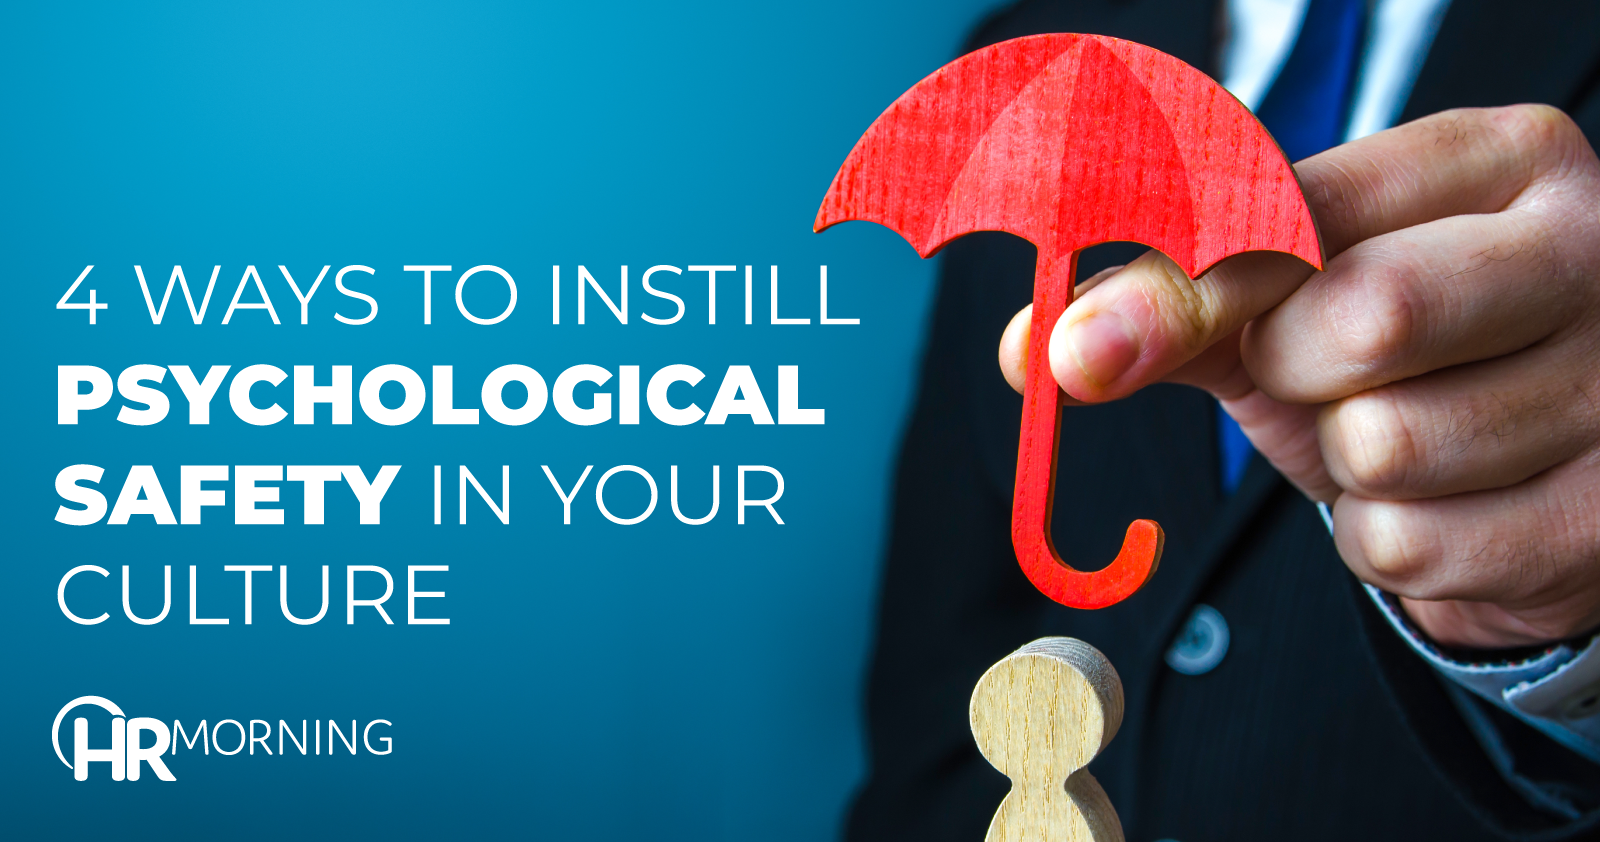 4 Ways To Instill Psychological Safety In Your Culture